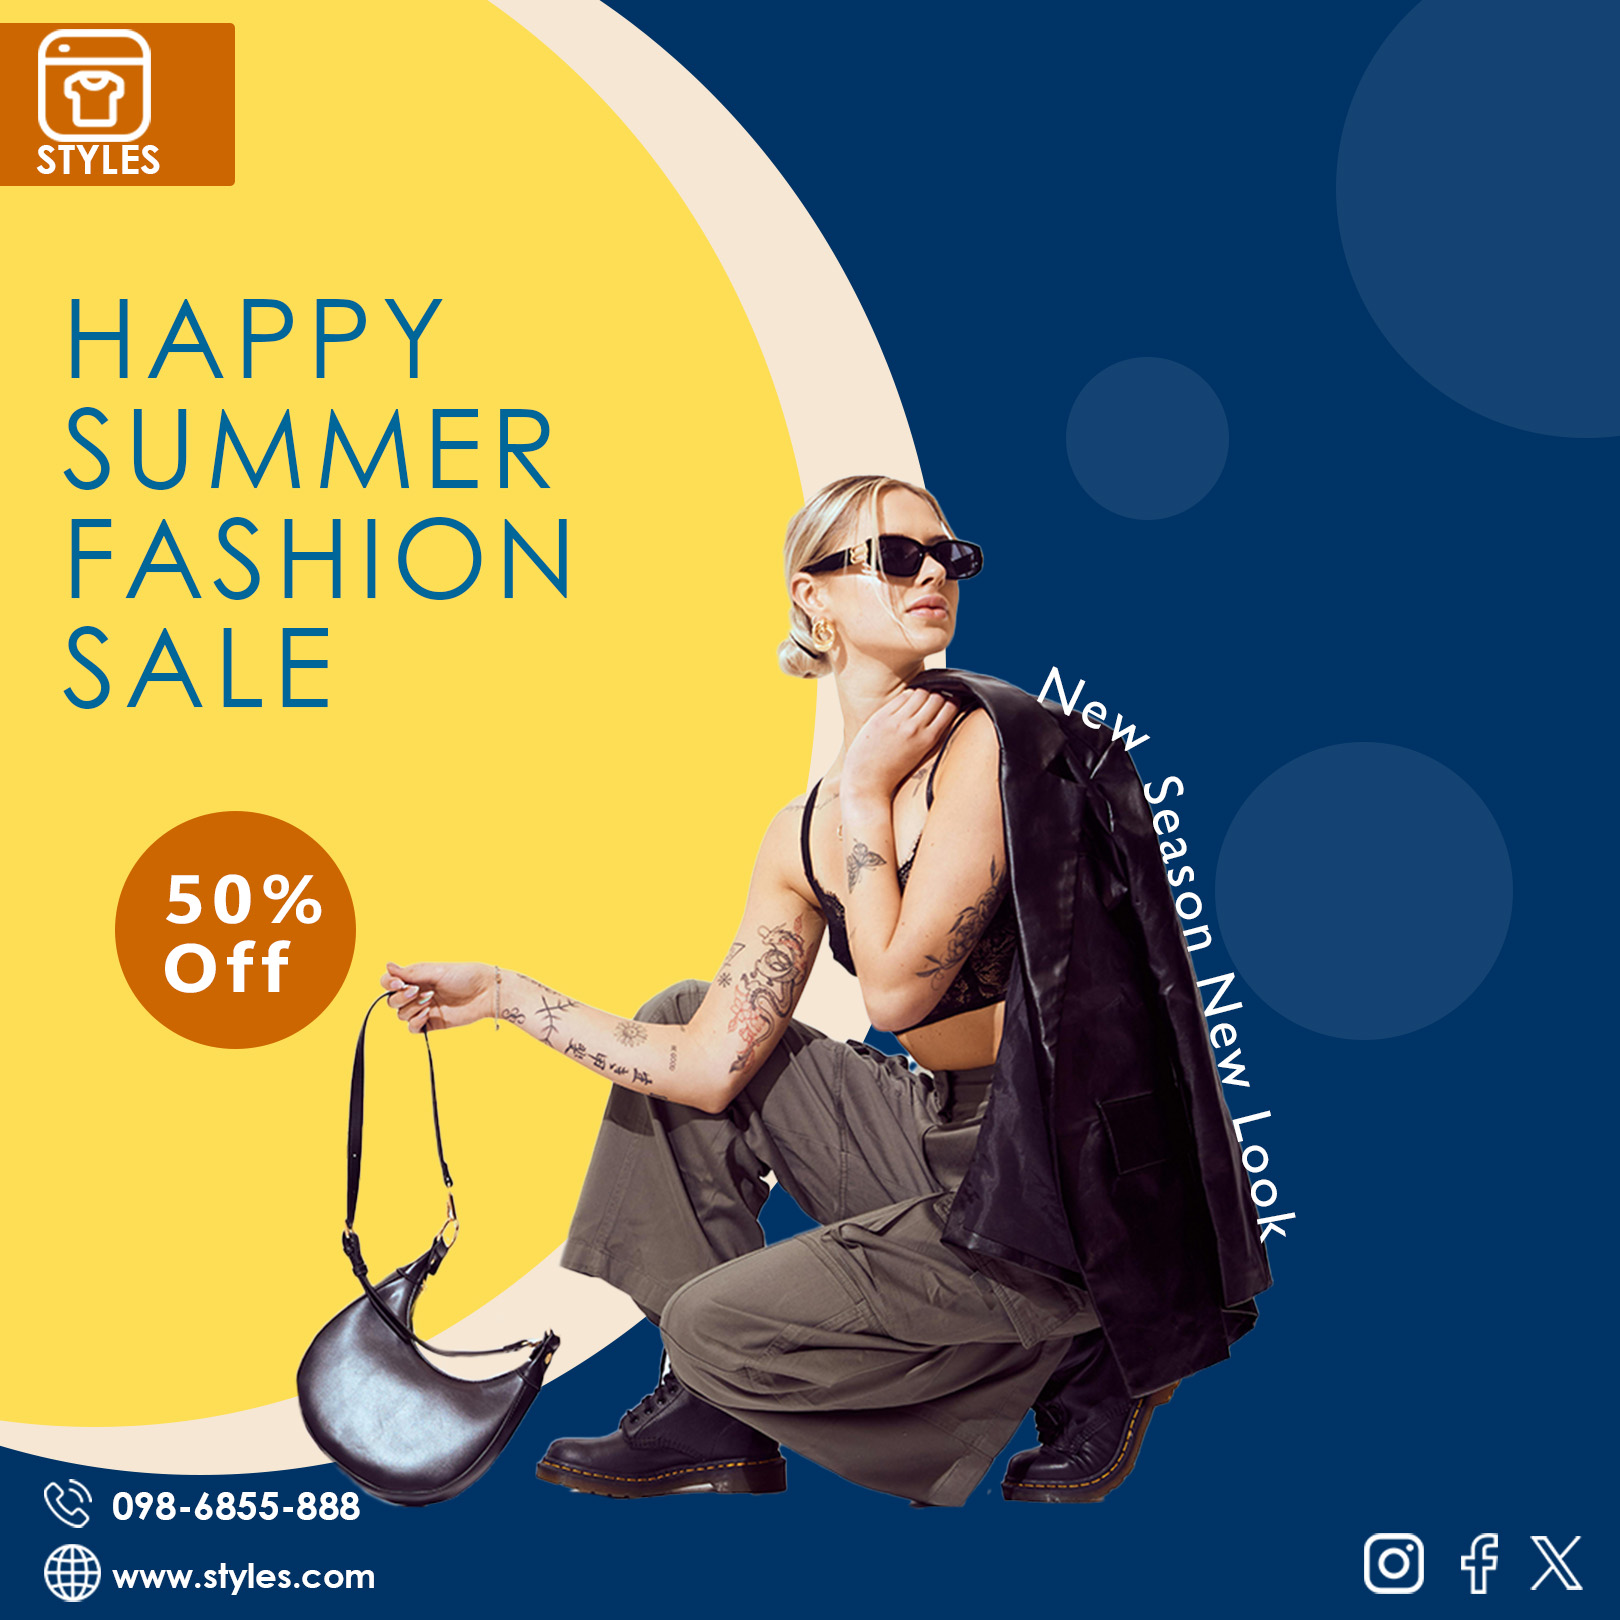 Fashion Sale Social Media Poster cover image.